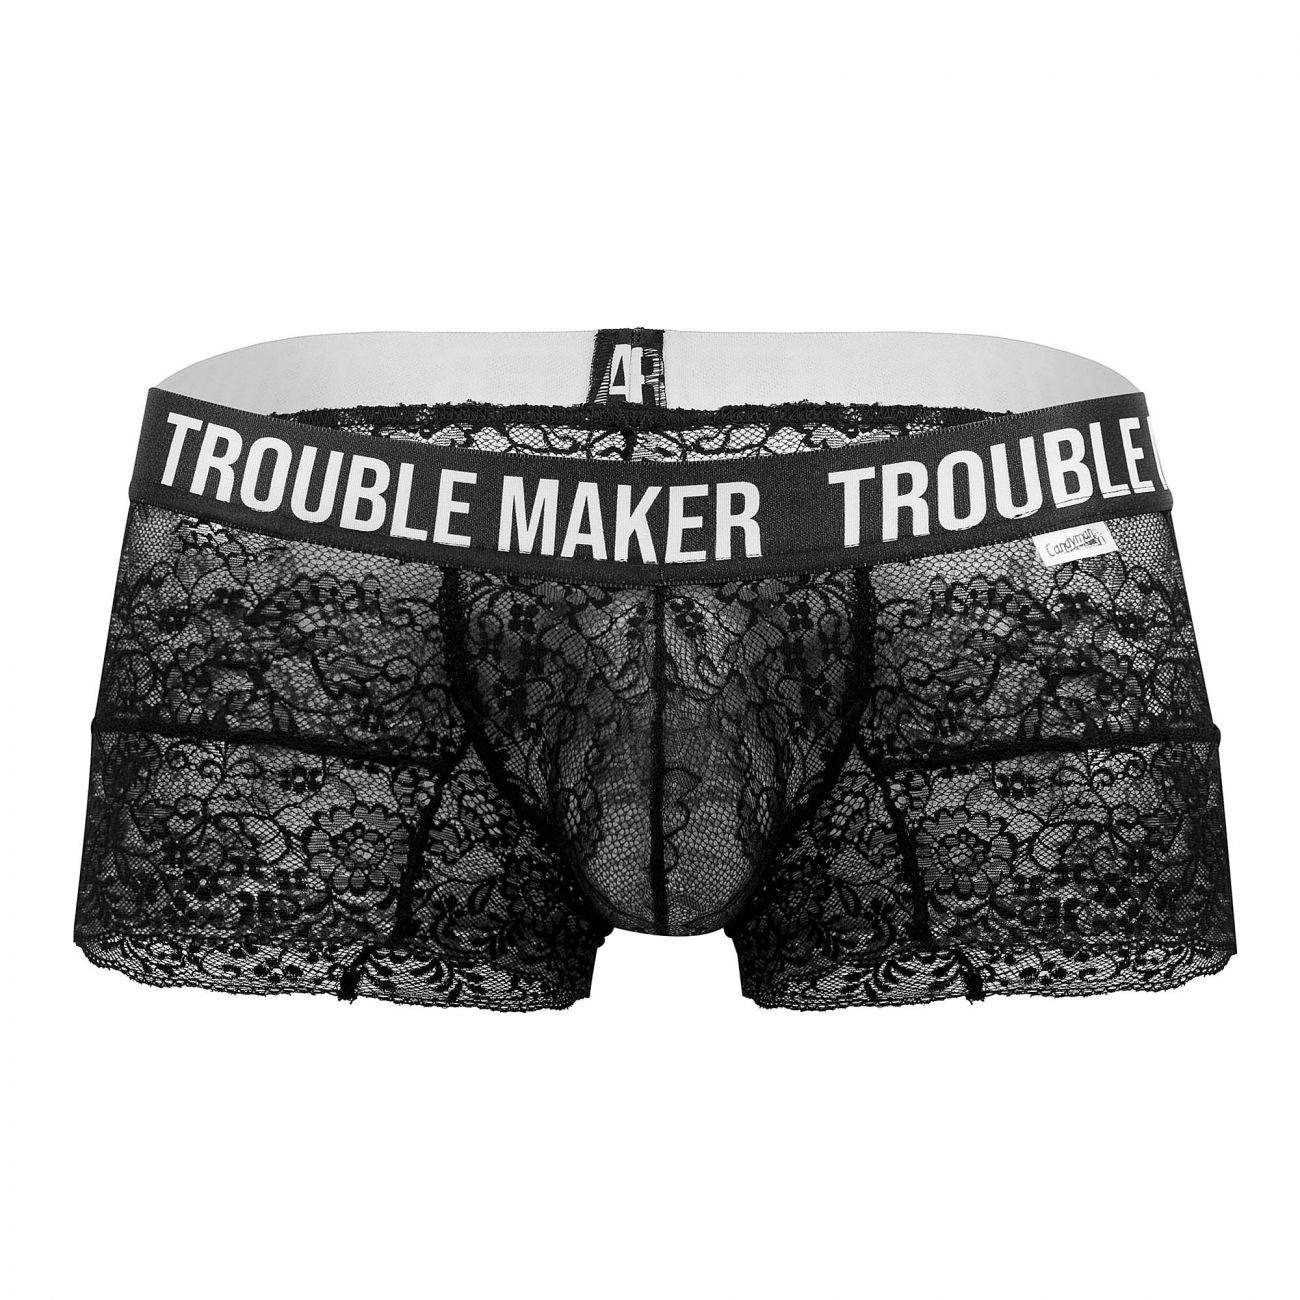 image of product,Trouble Maker Lace Trunks - SEXYEONE